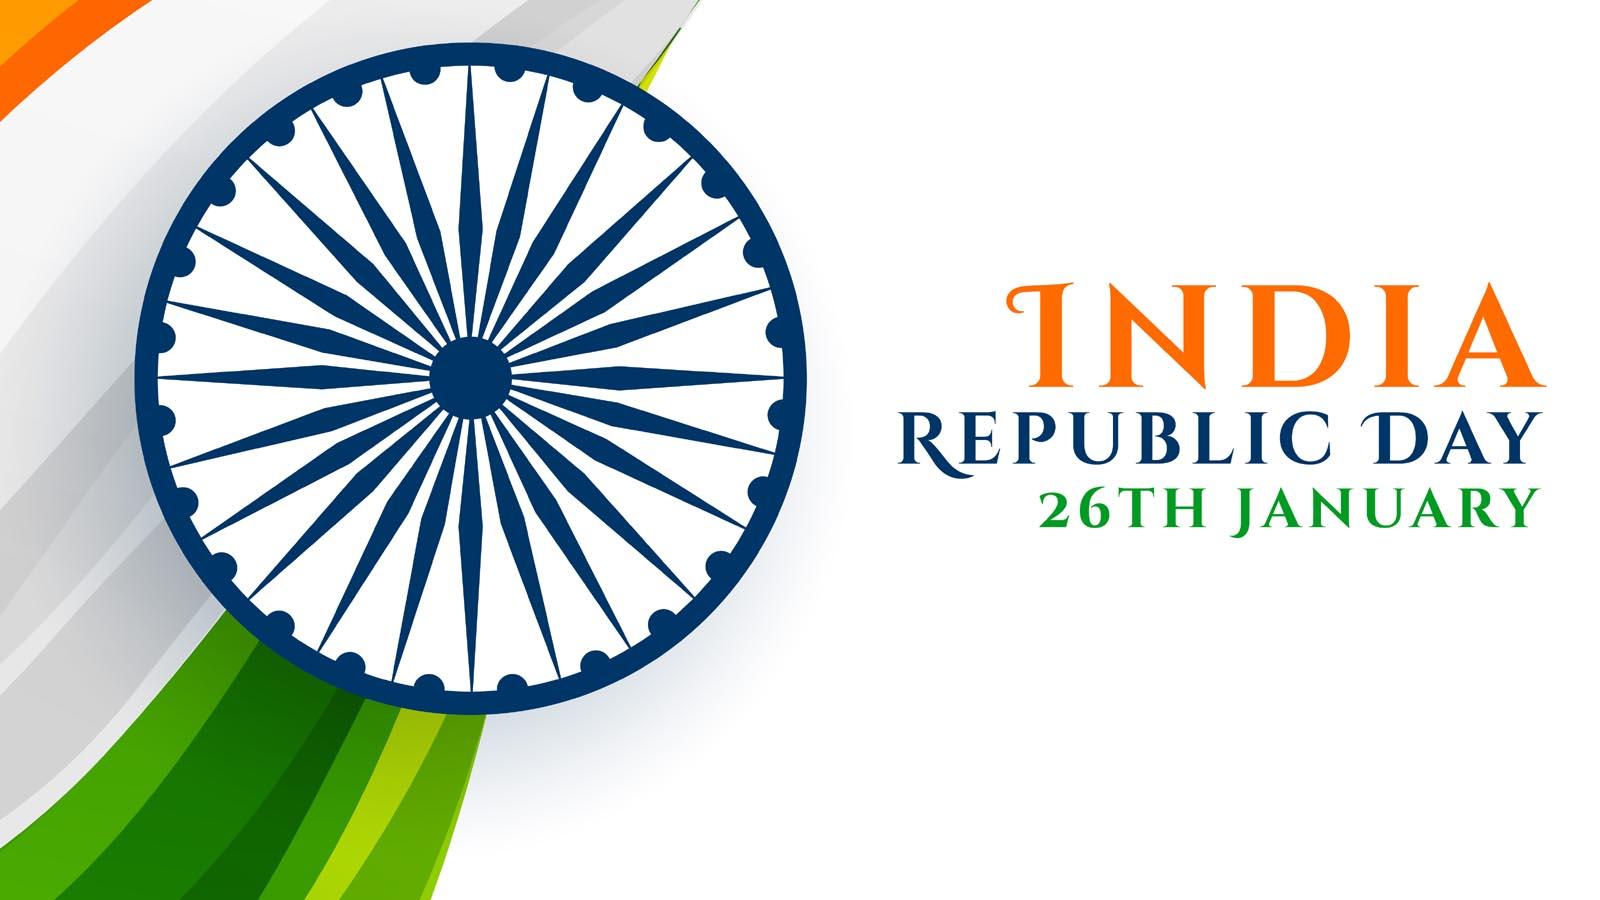 Short Happy Republic Day Message Quotes for Employees in Hindi and English